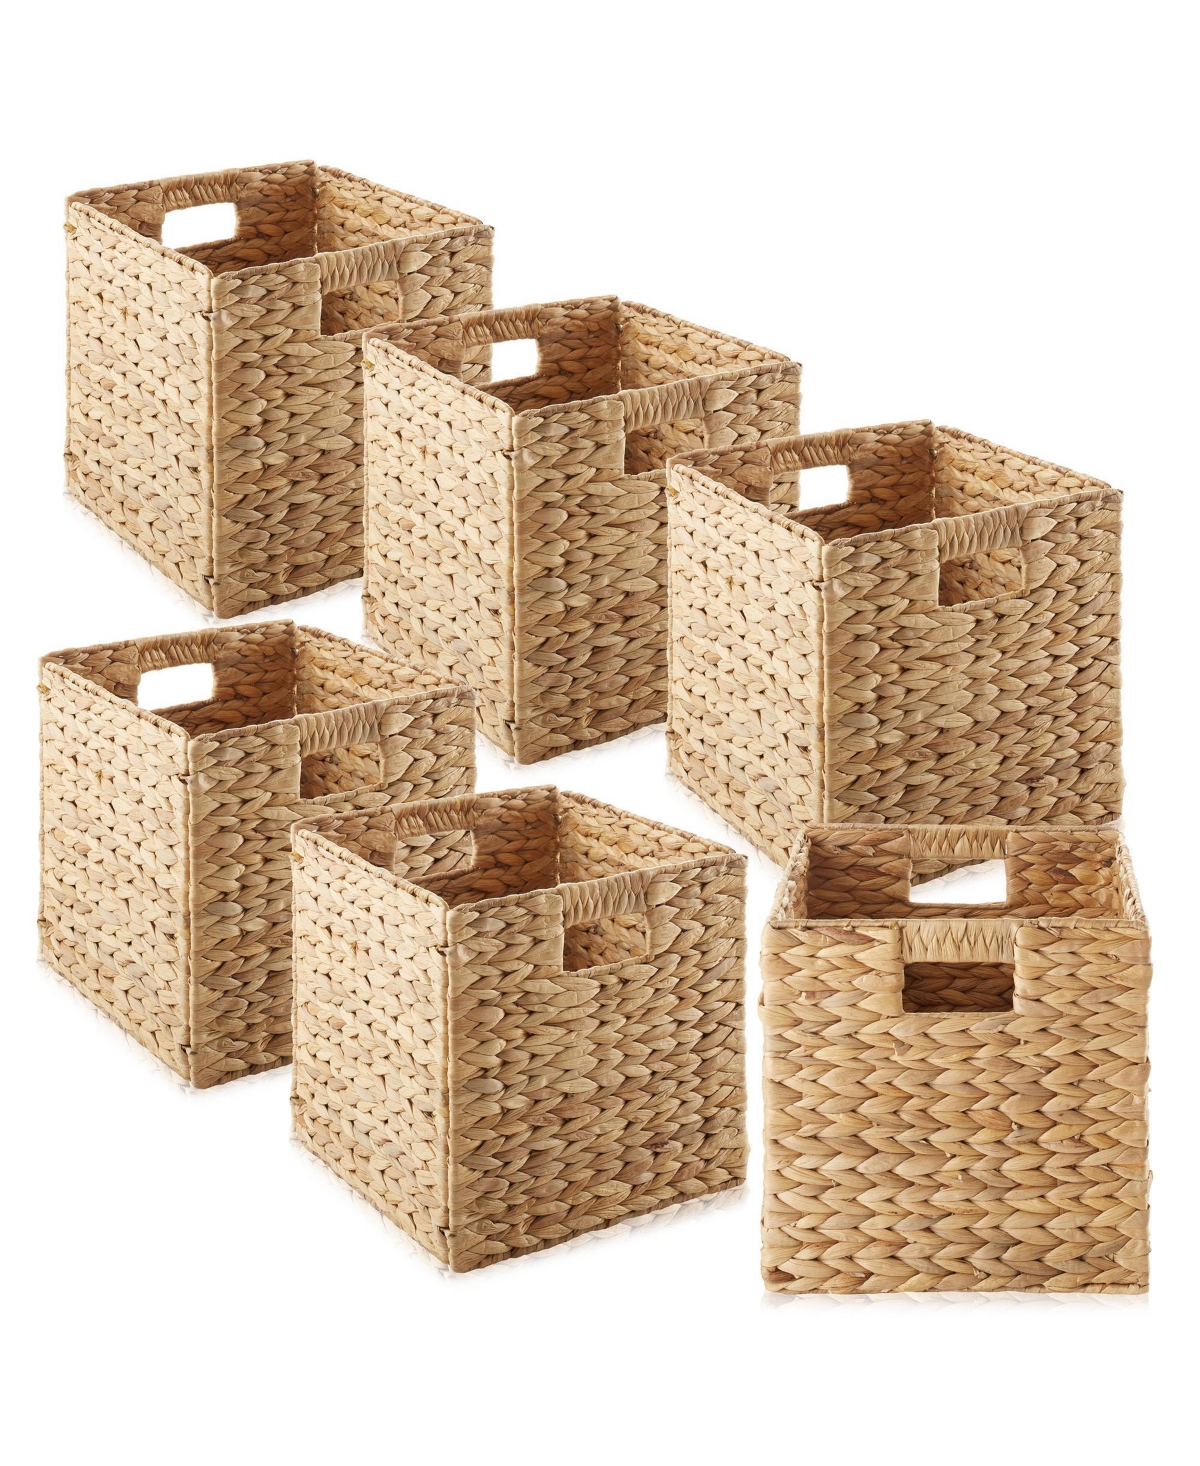 10.5" x 10.5" Water Hyacinth Storage Baskets, Natural - Set of 6 Collapsible Cube Organizers, Woven Bins for Bathroom, Bedroom, Laundry, Pan